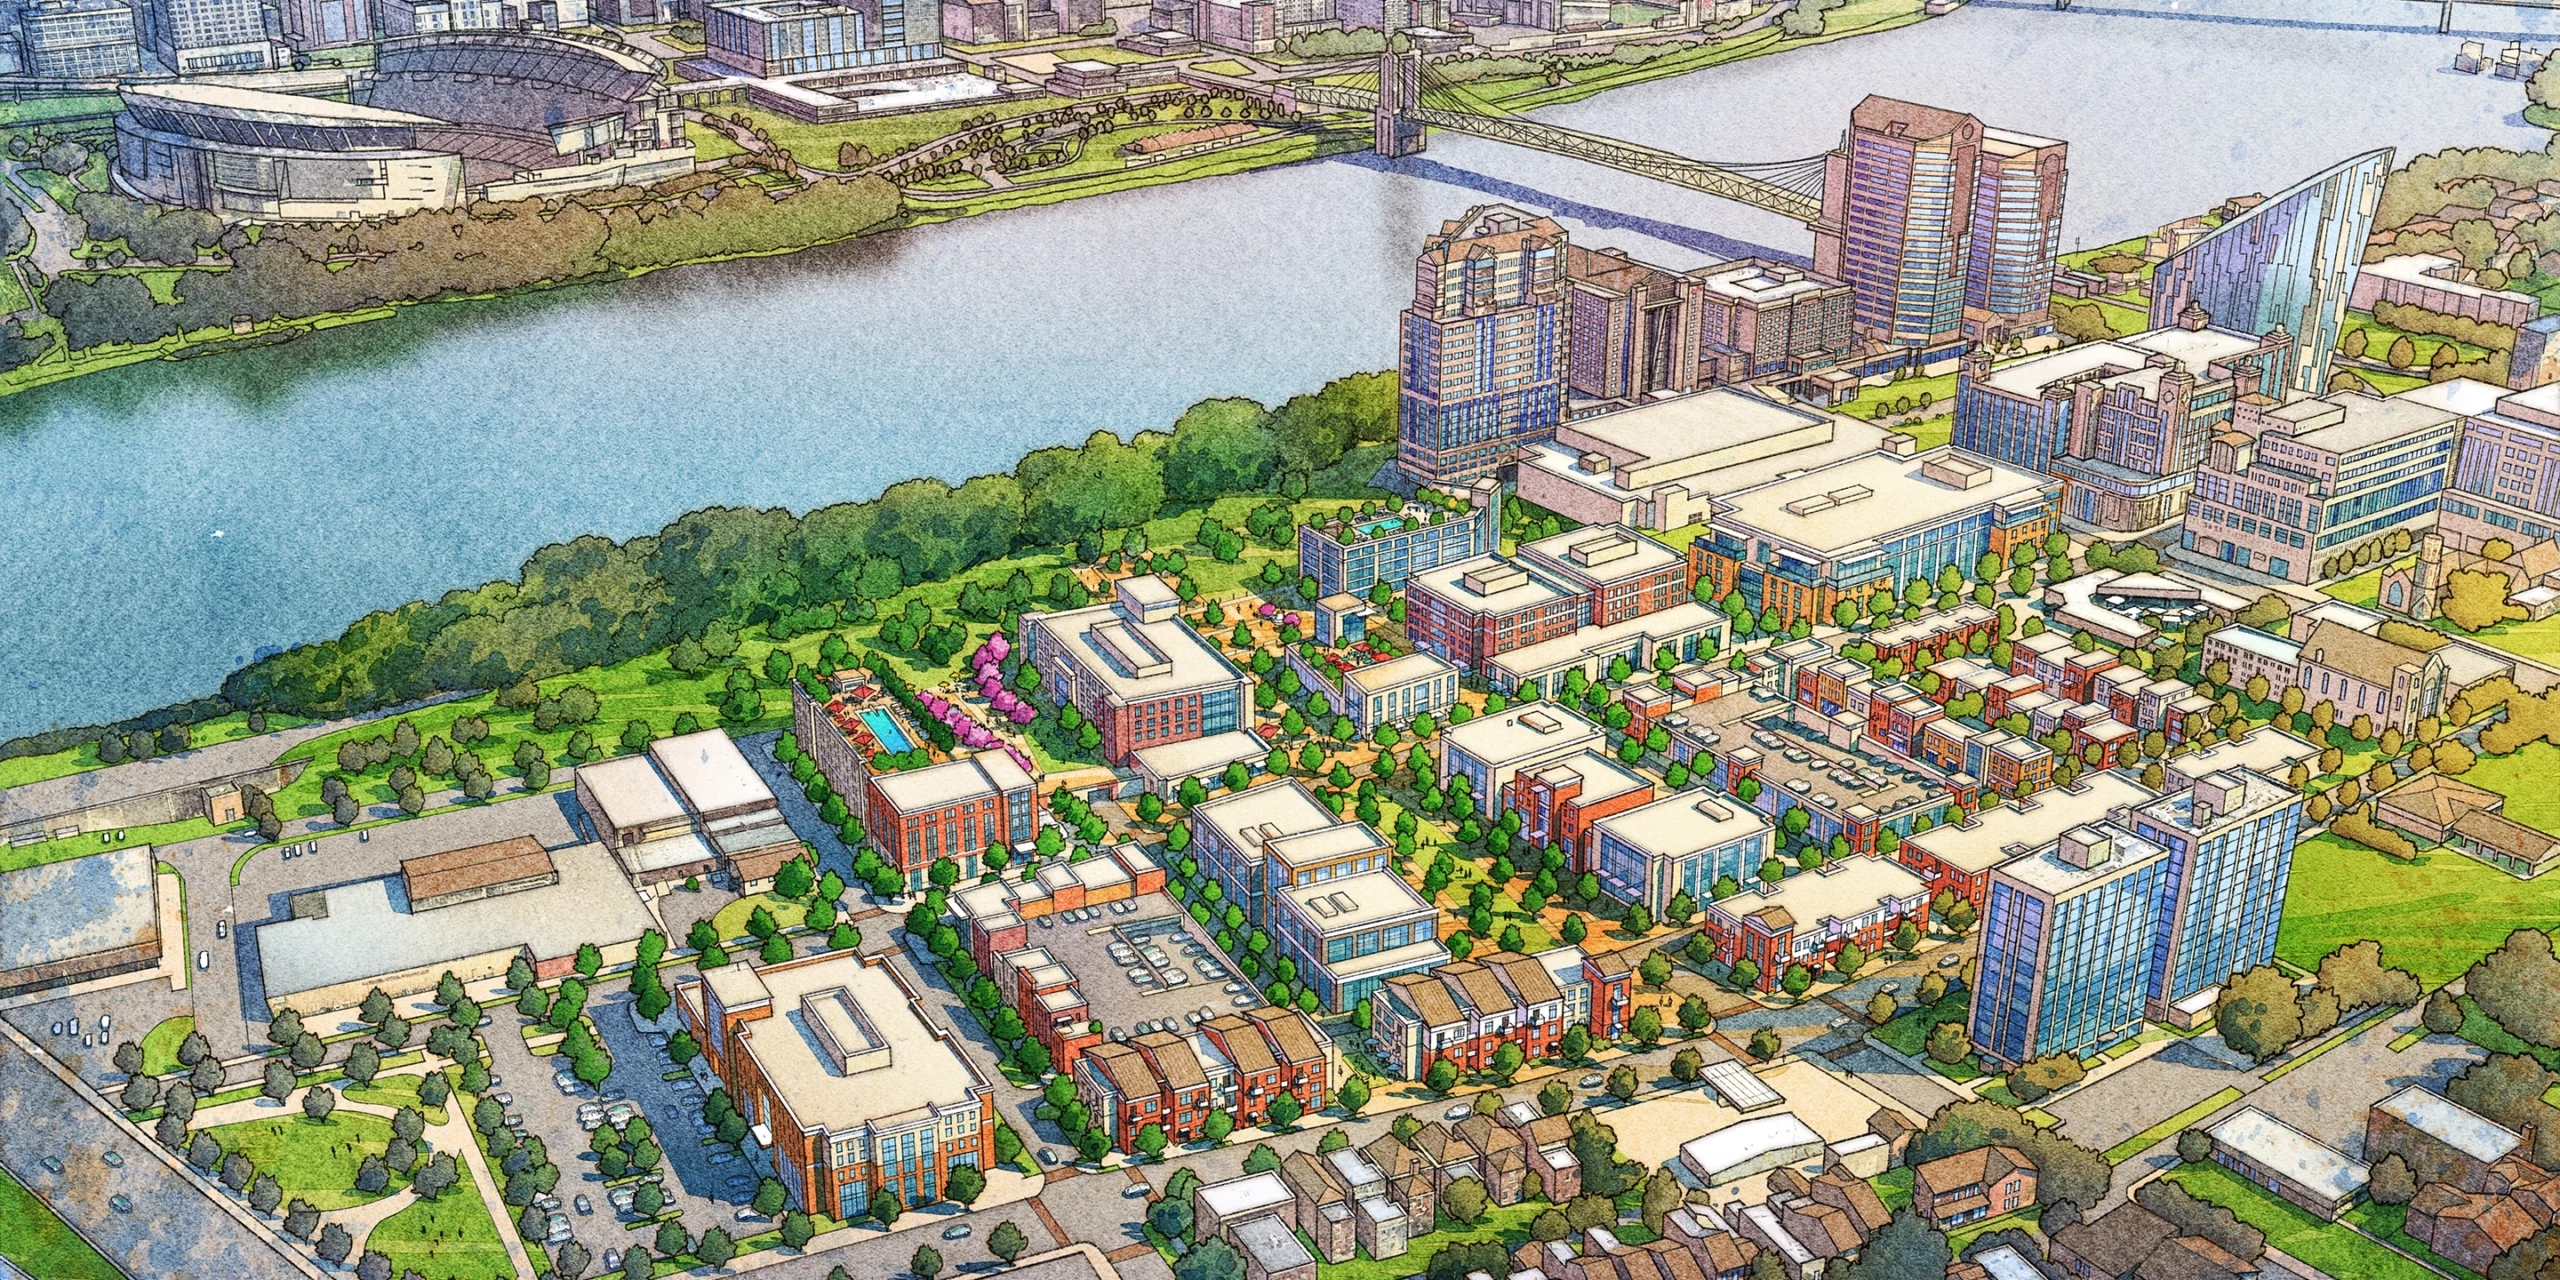 coopercarry-covington-central-riverfront-aerial-rendering